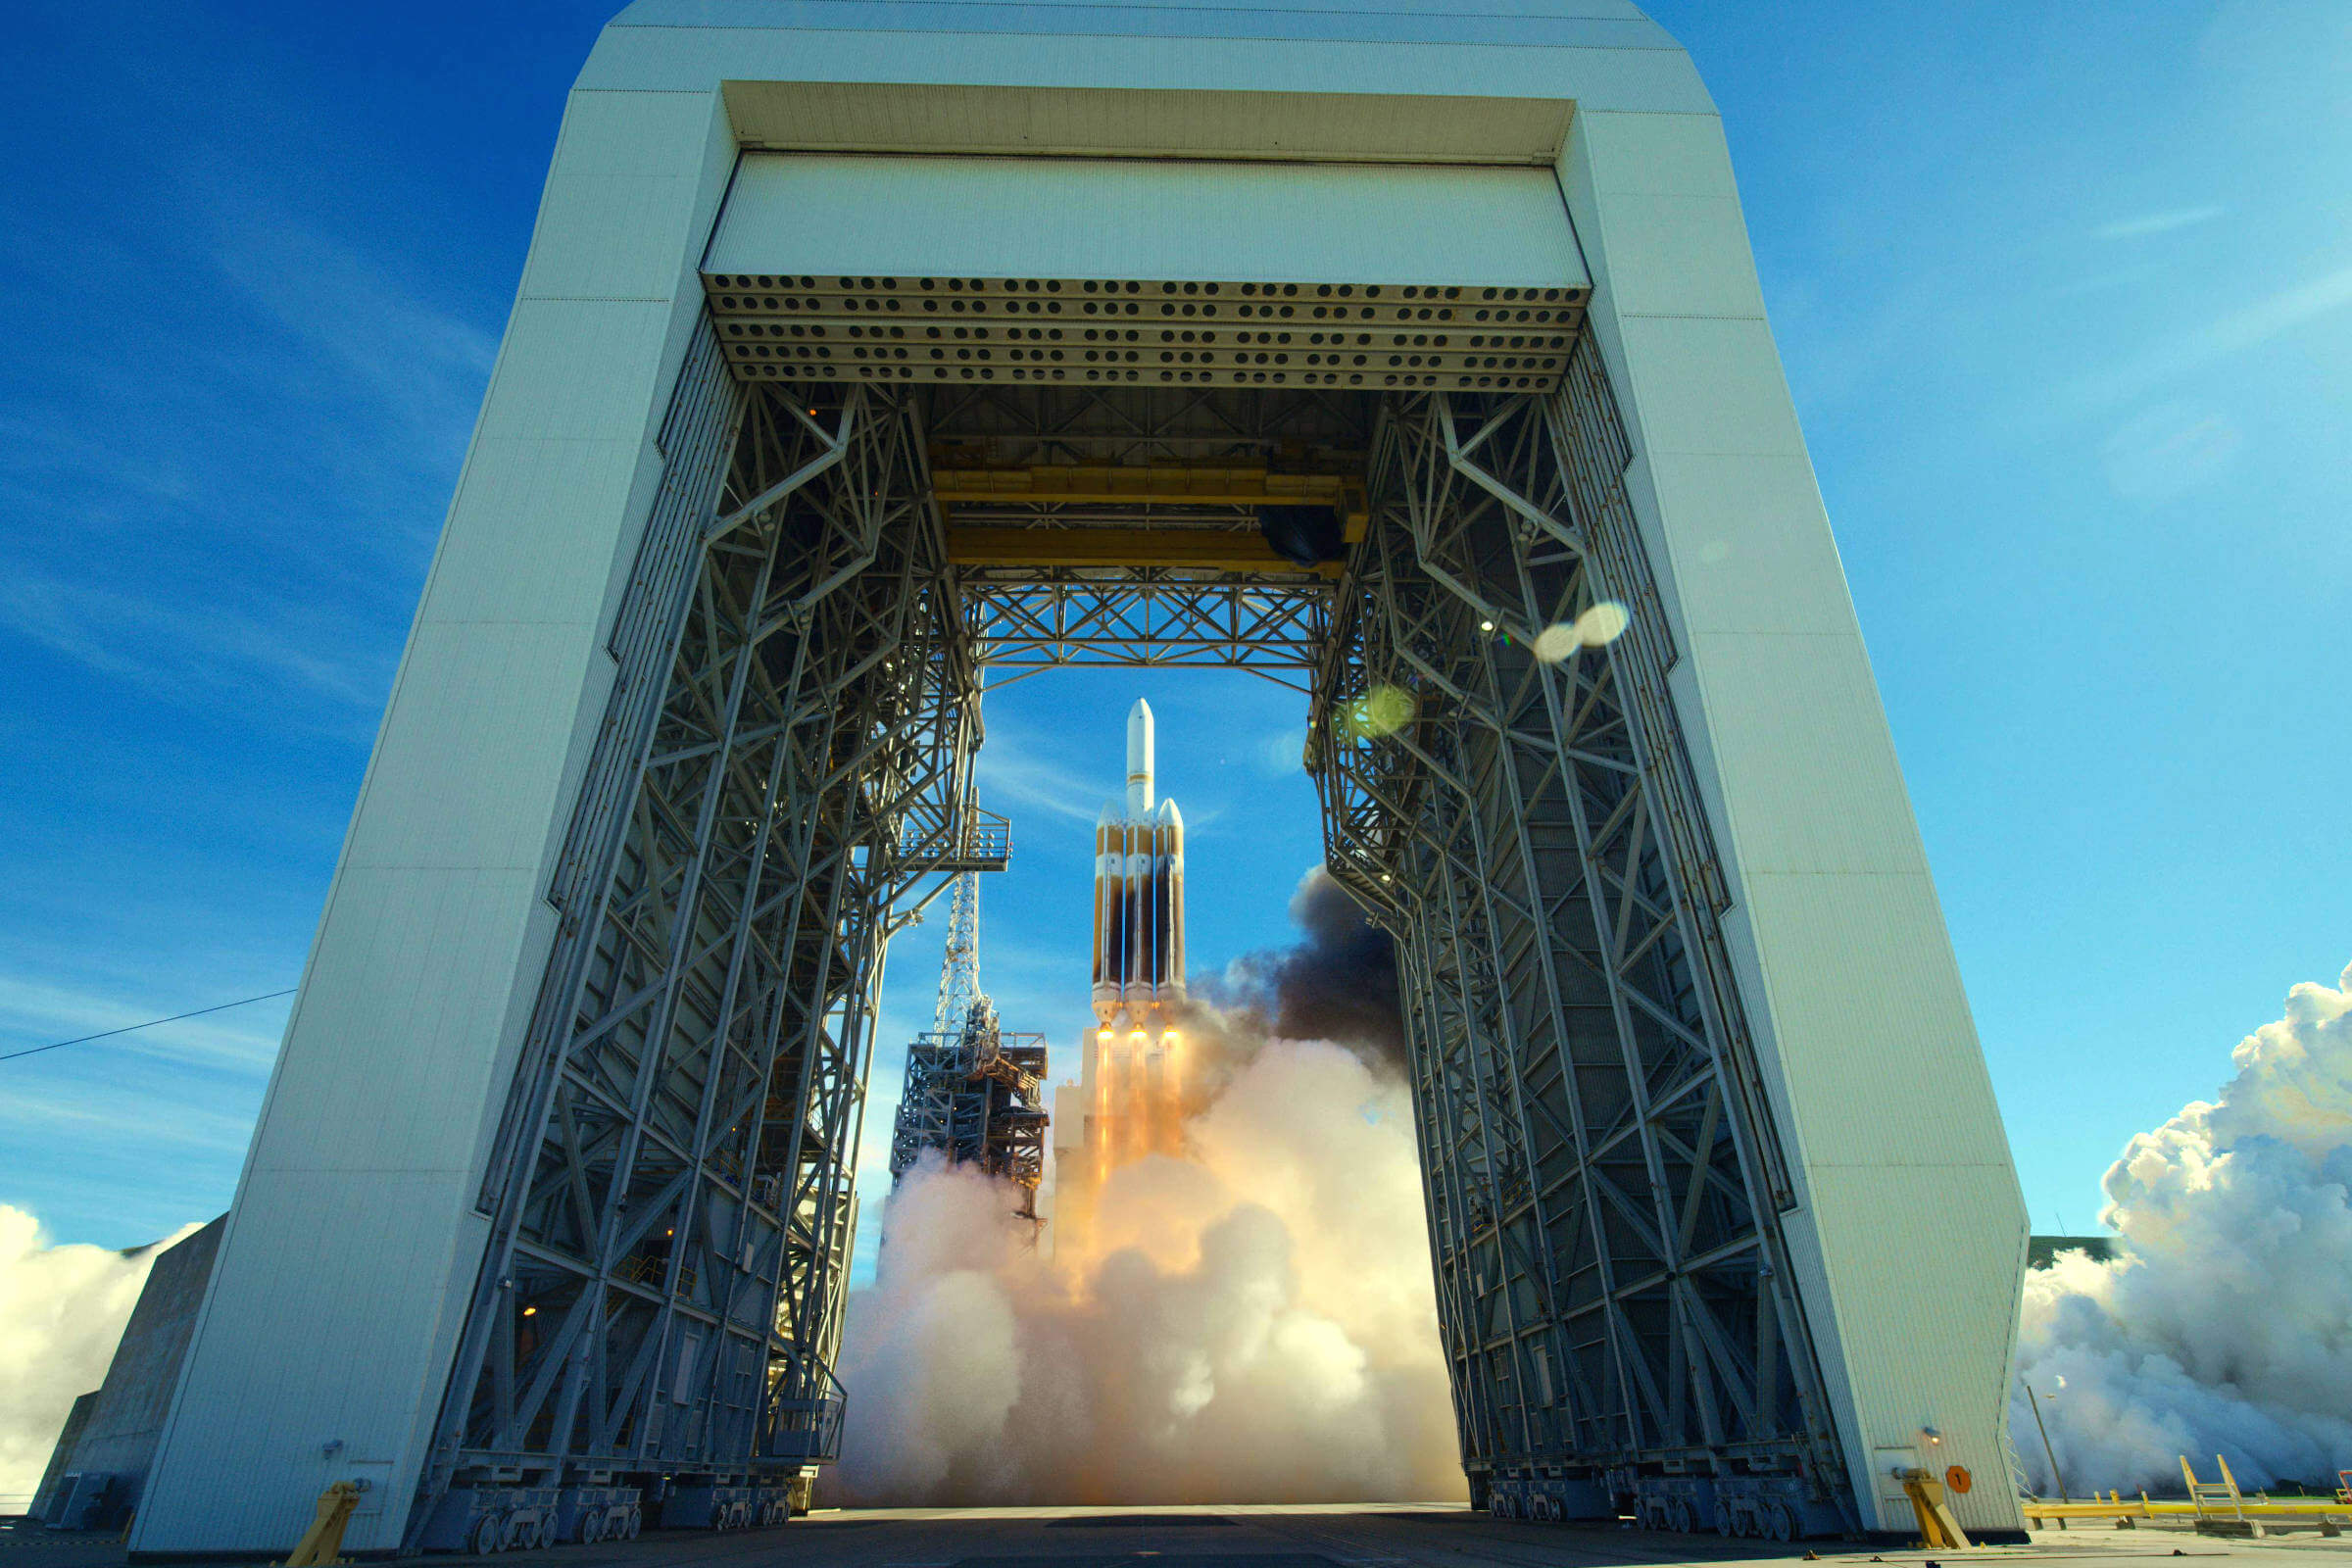 Delta IV Heavy Rocket could transport a space probe to avert and redirect an asteroid on a path toward Earth.